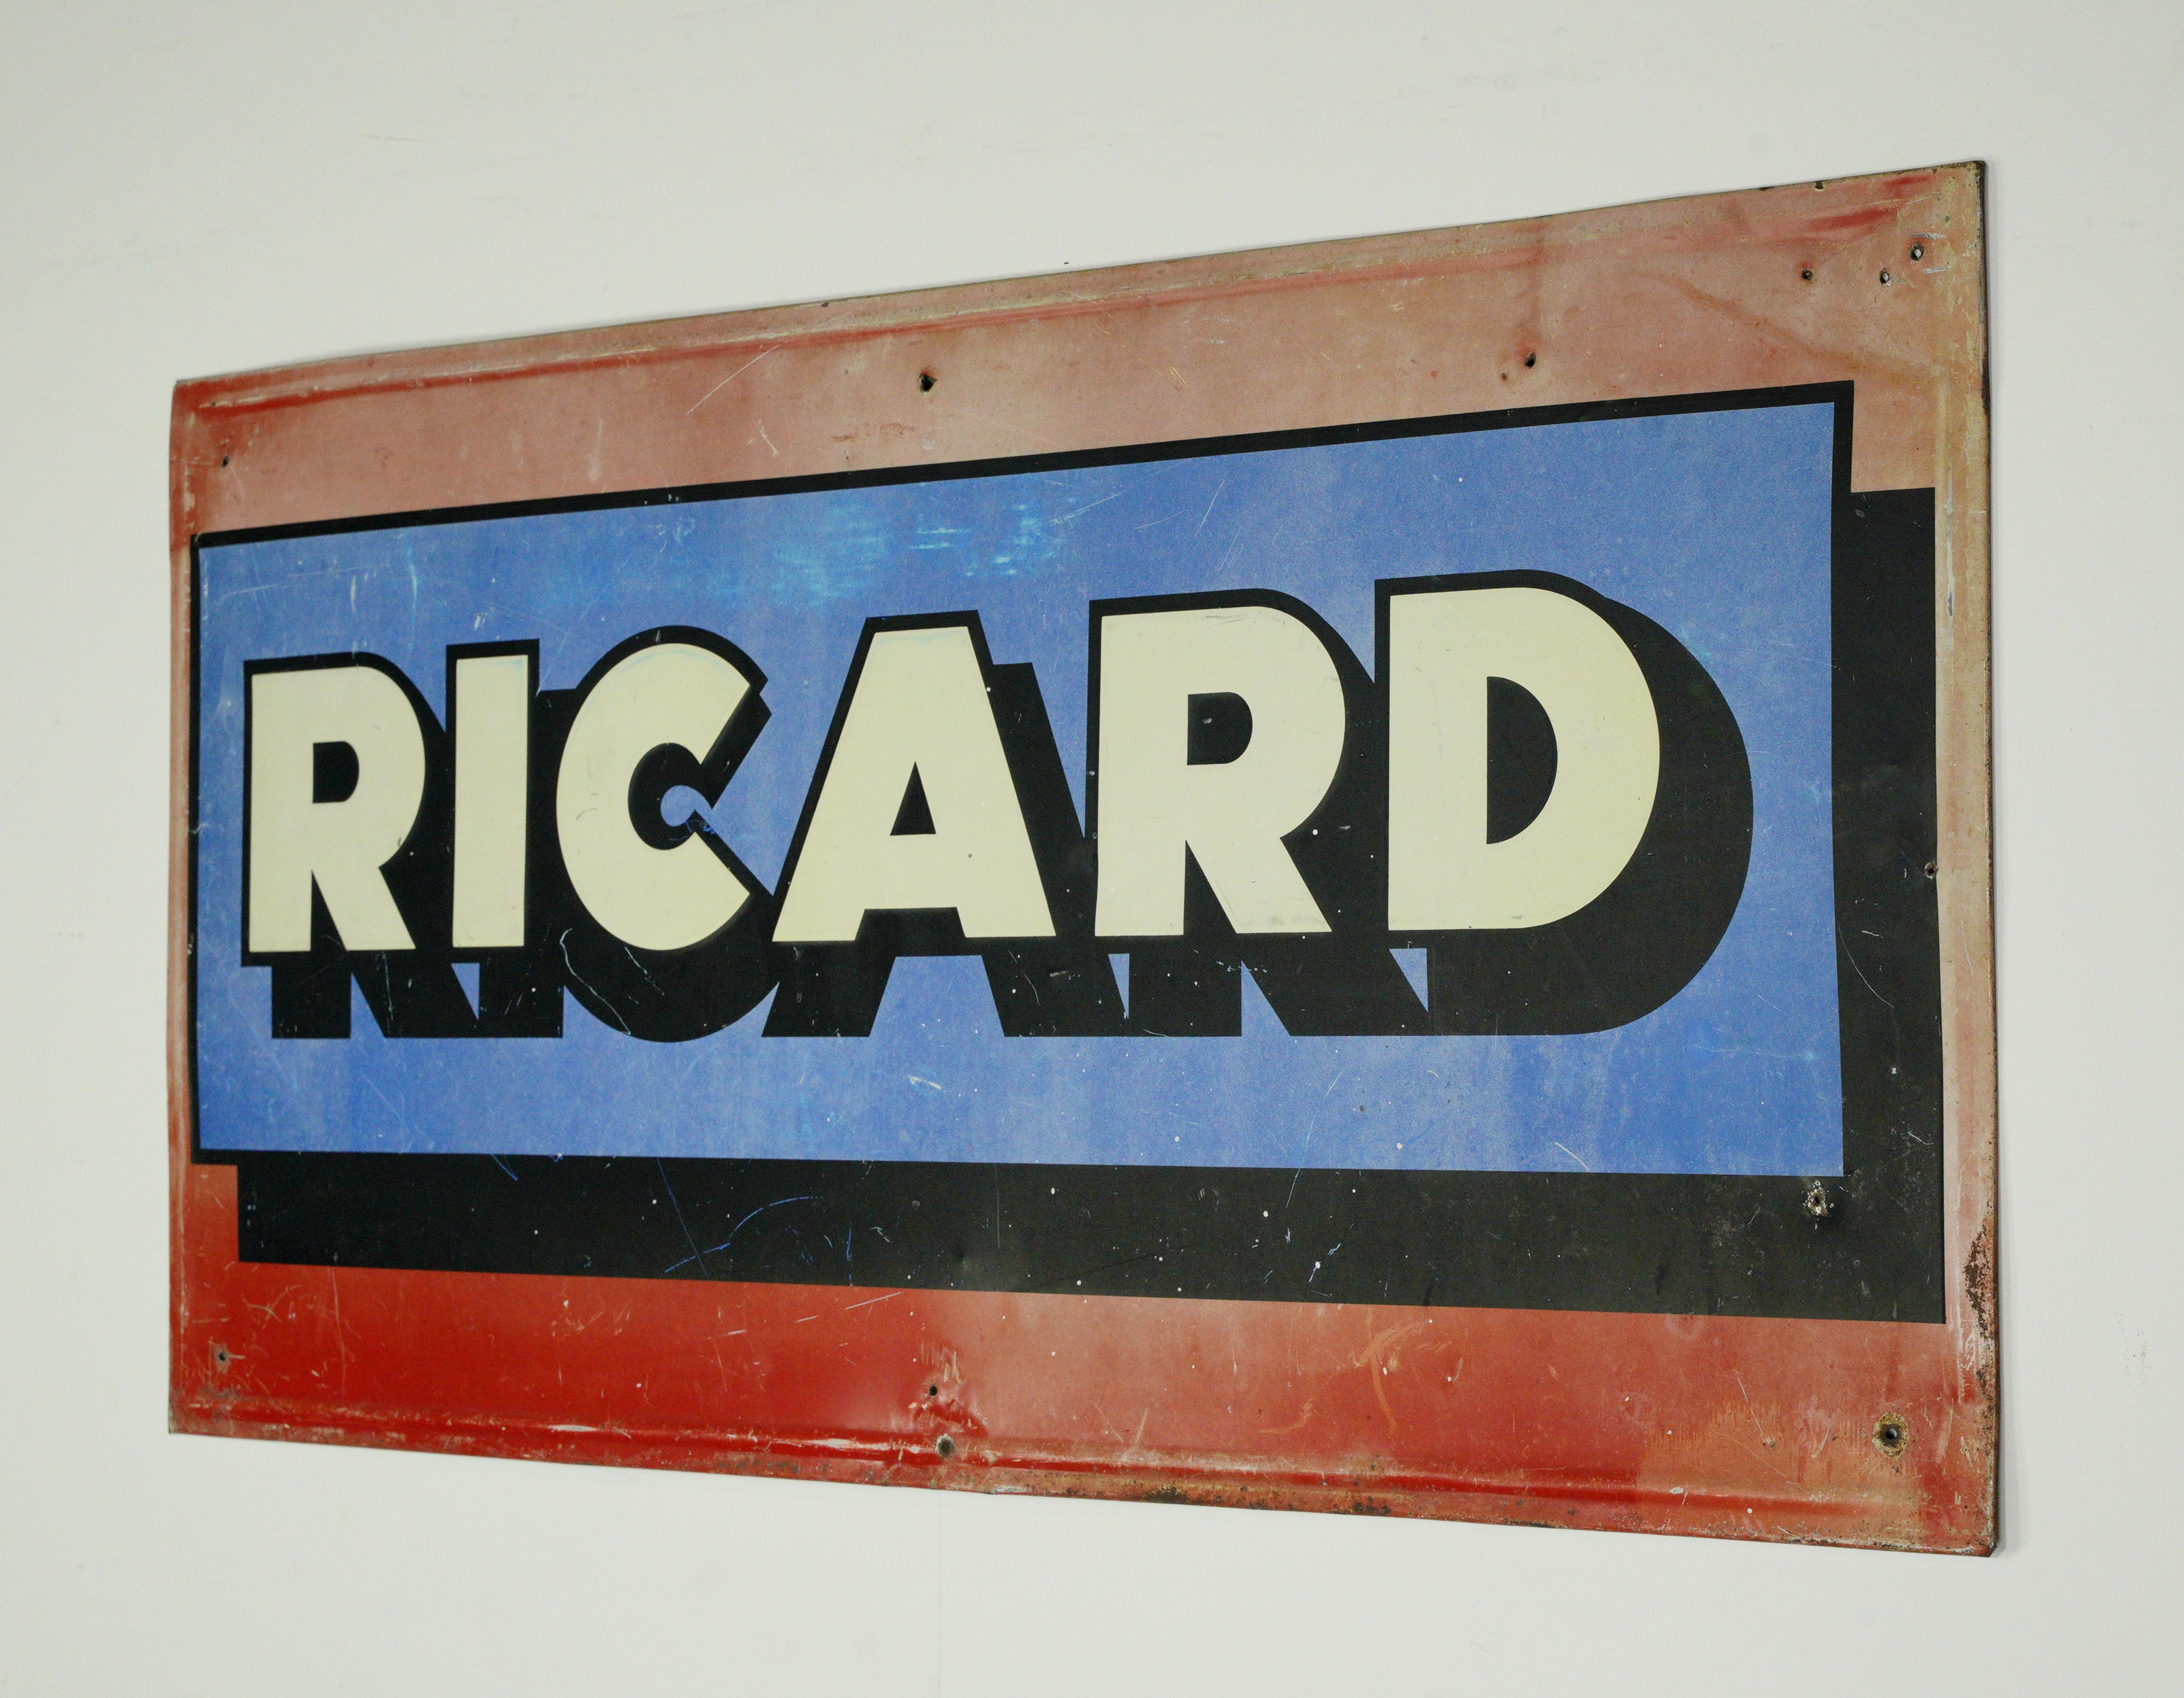 Blue red and white Ricard steel sign coated in enamel. Good condition with appropriate wear from age. One available. Please note, this item is located in one of our NYC locations.